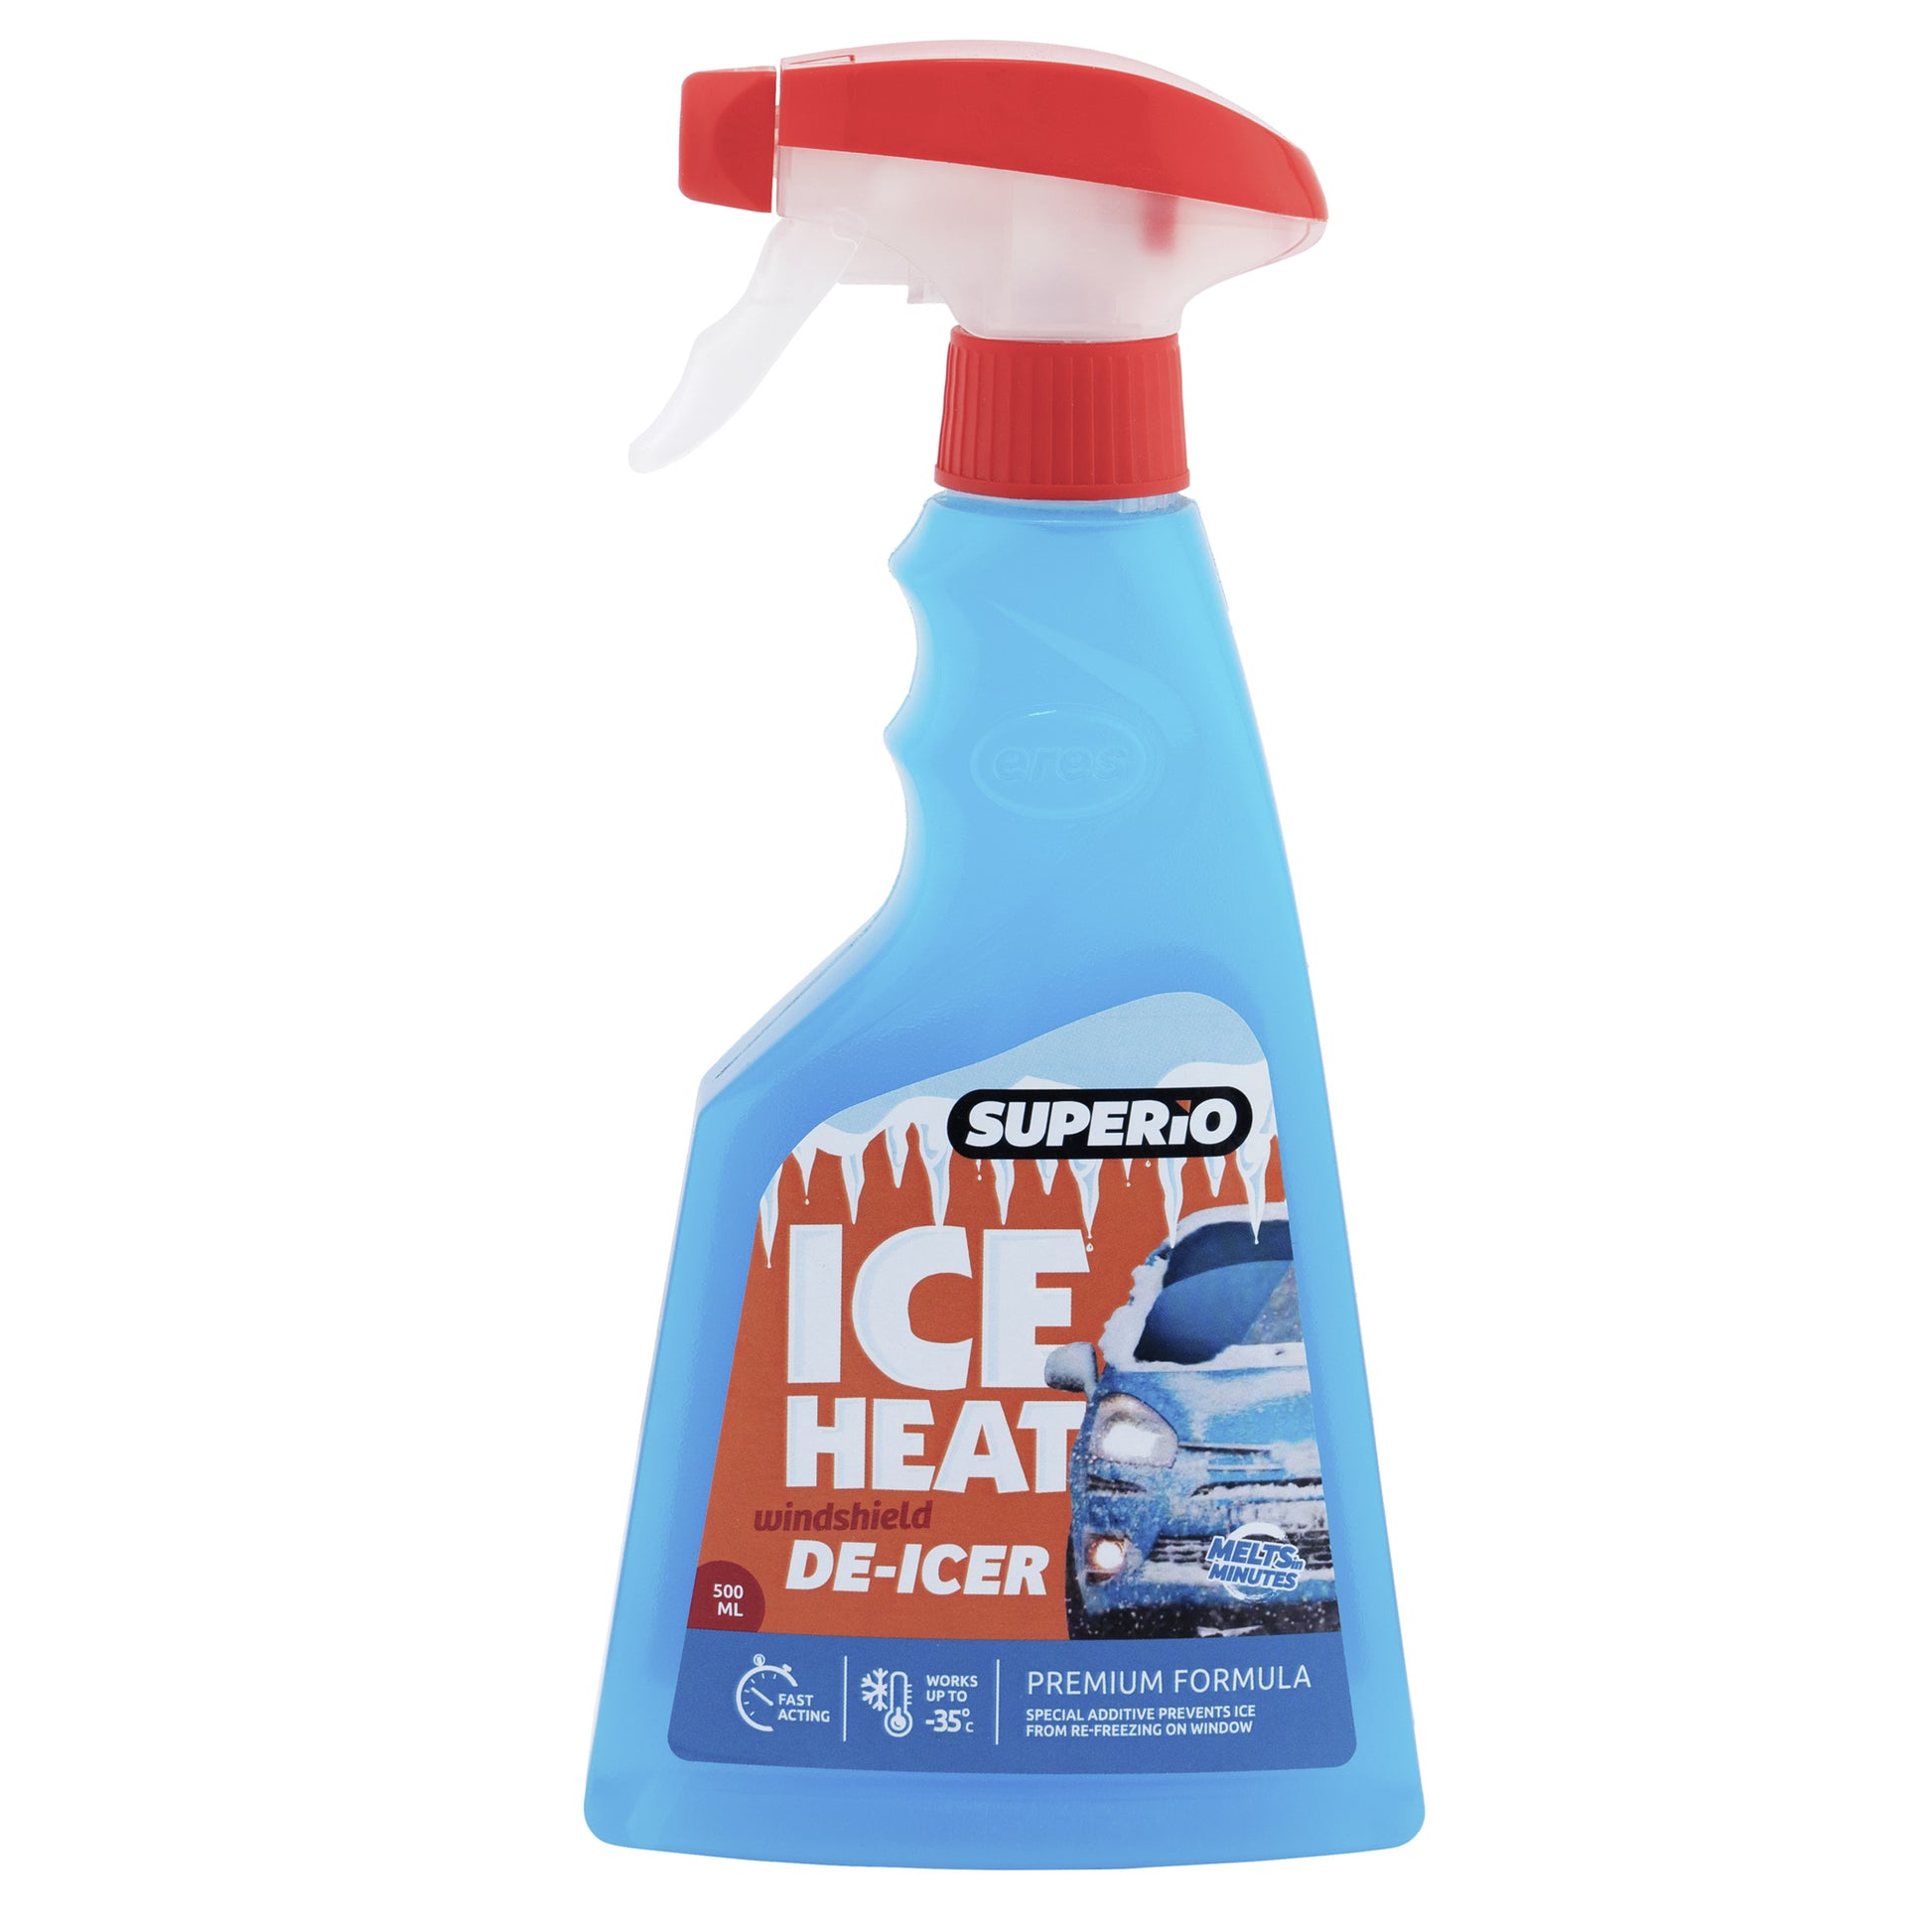 Auto Windshield Spray De-icer Spray Quickly And Easily Melts Ice